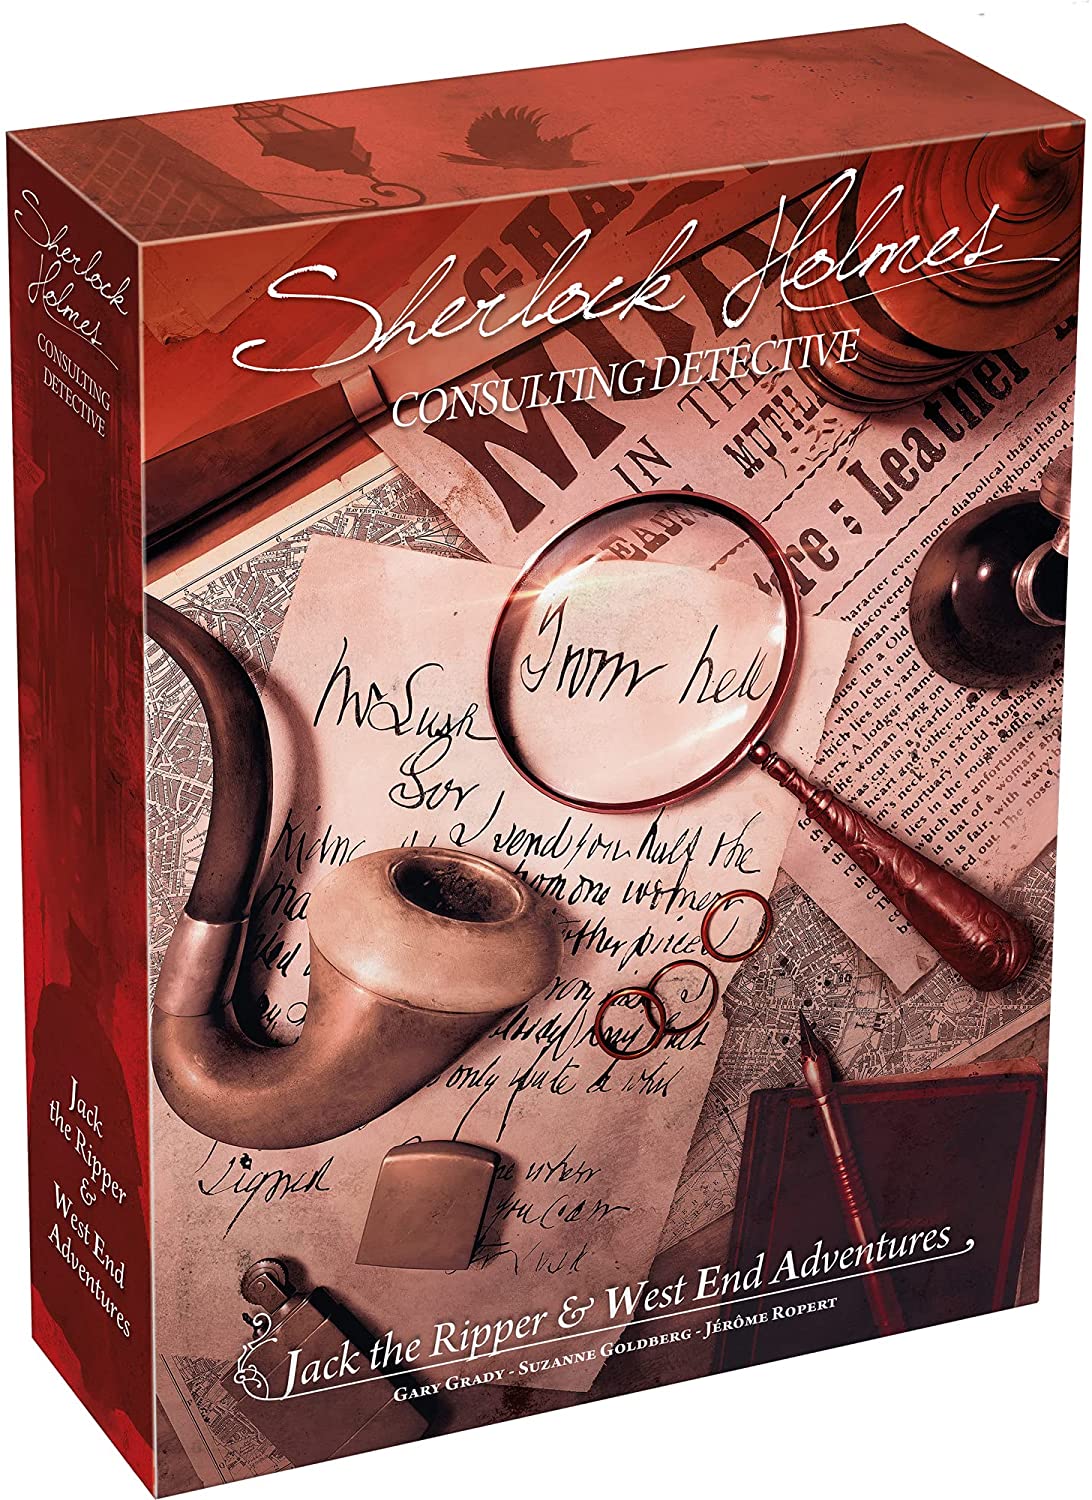 Sherlock Holmes Consulting Detective 2: Jack the Ripper & West End Adventures